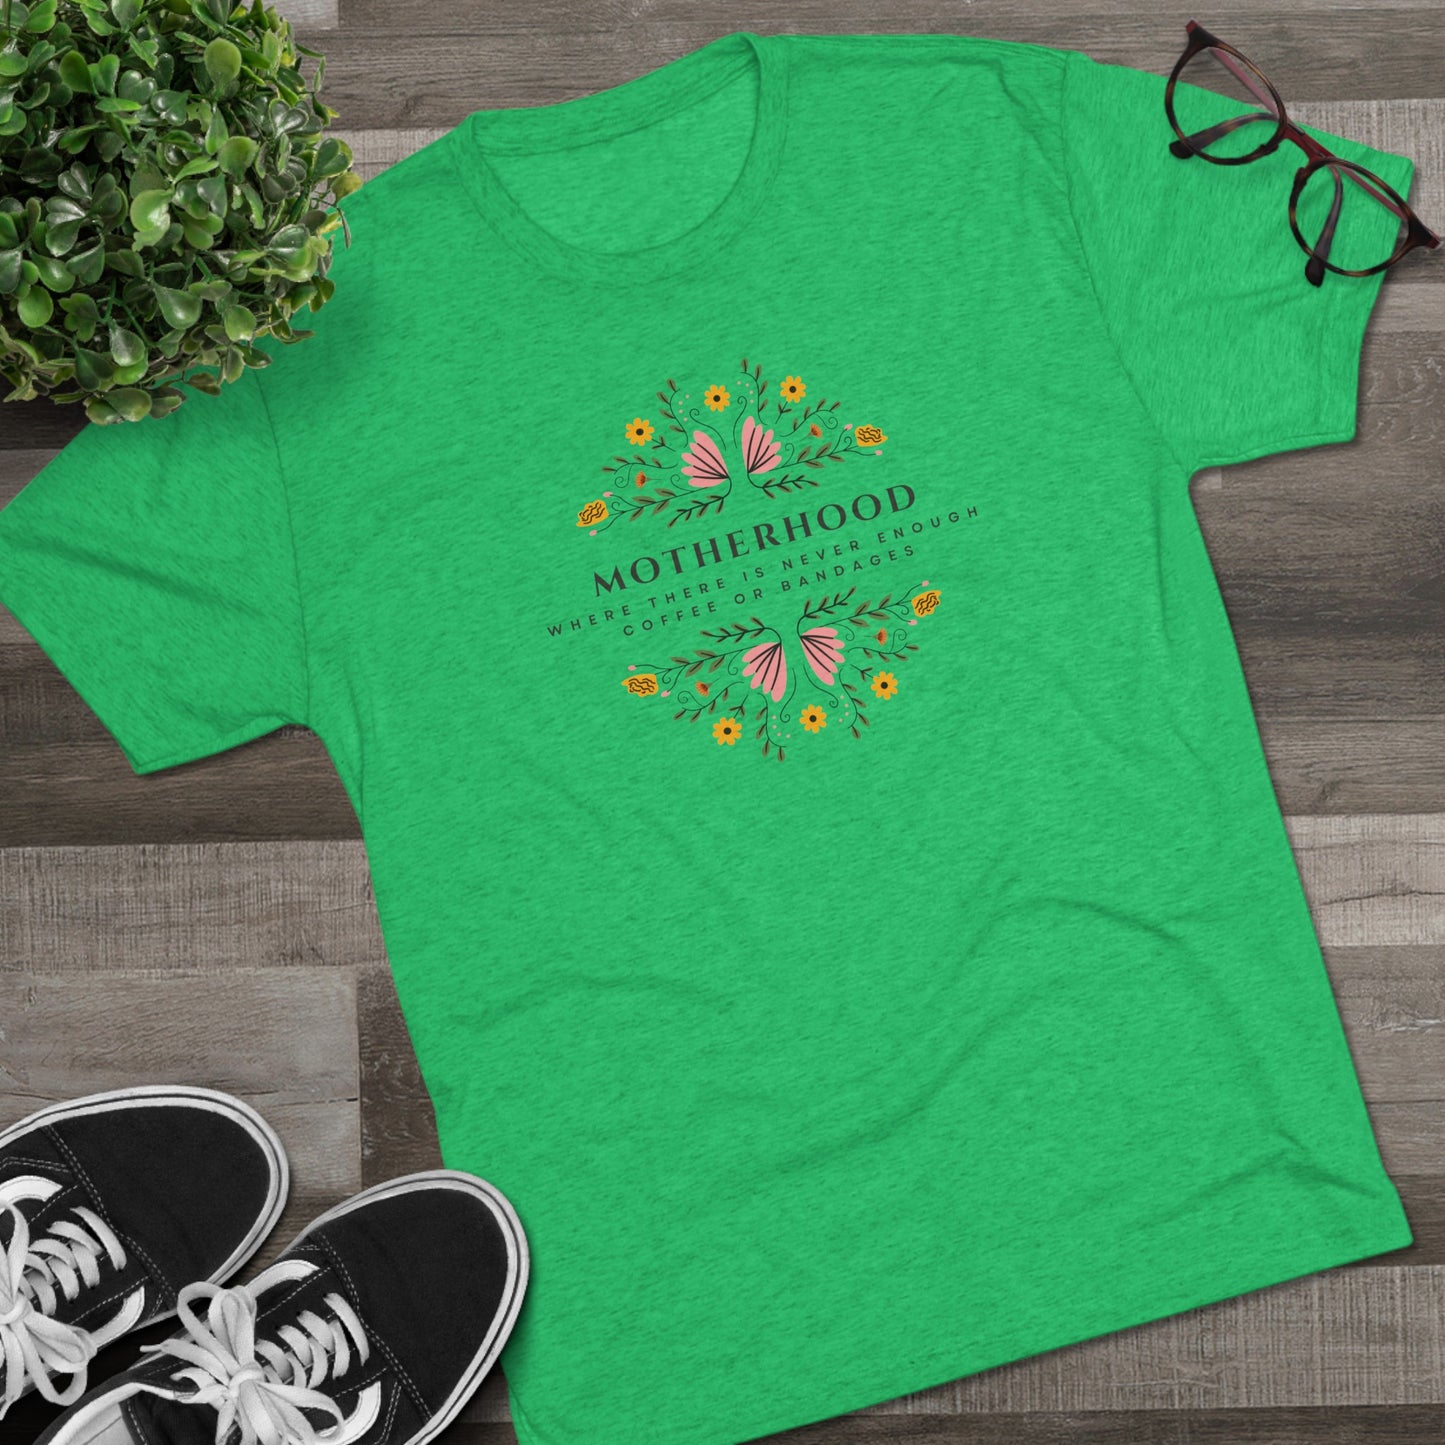 Motherhood: Where there is never enough coffee or bandages Tri-Blend Crew Tee